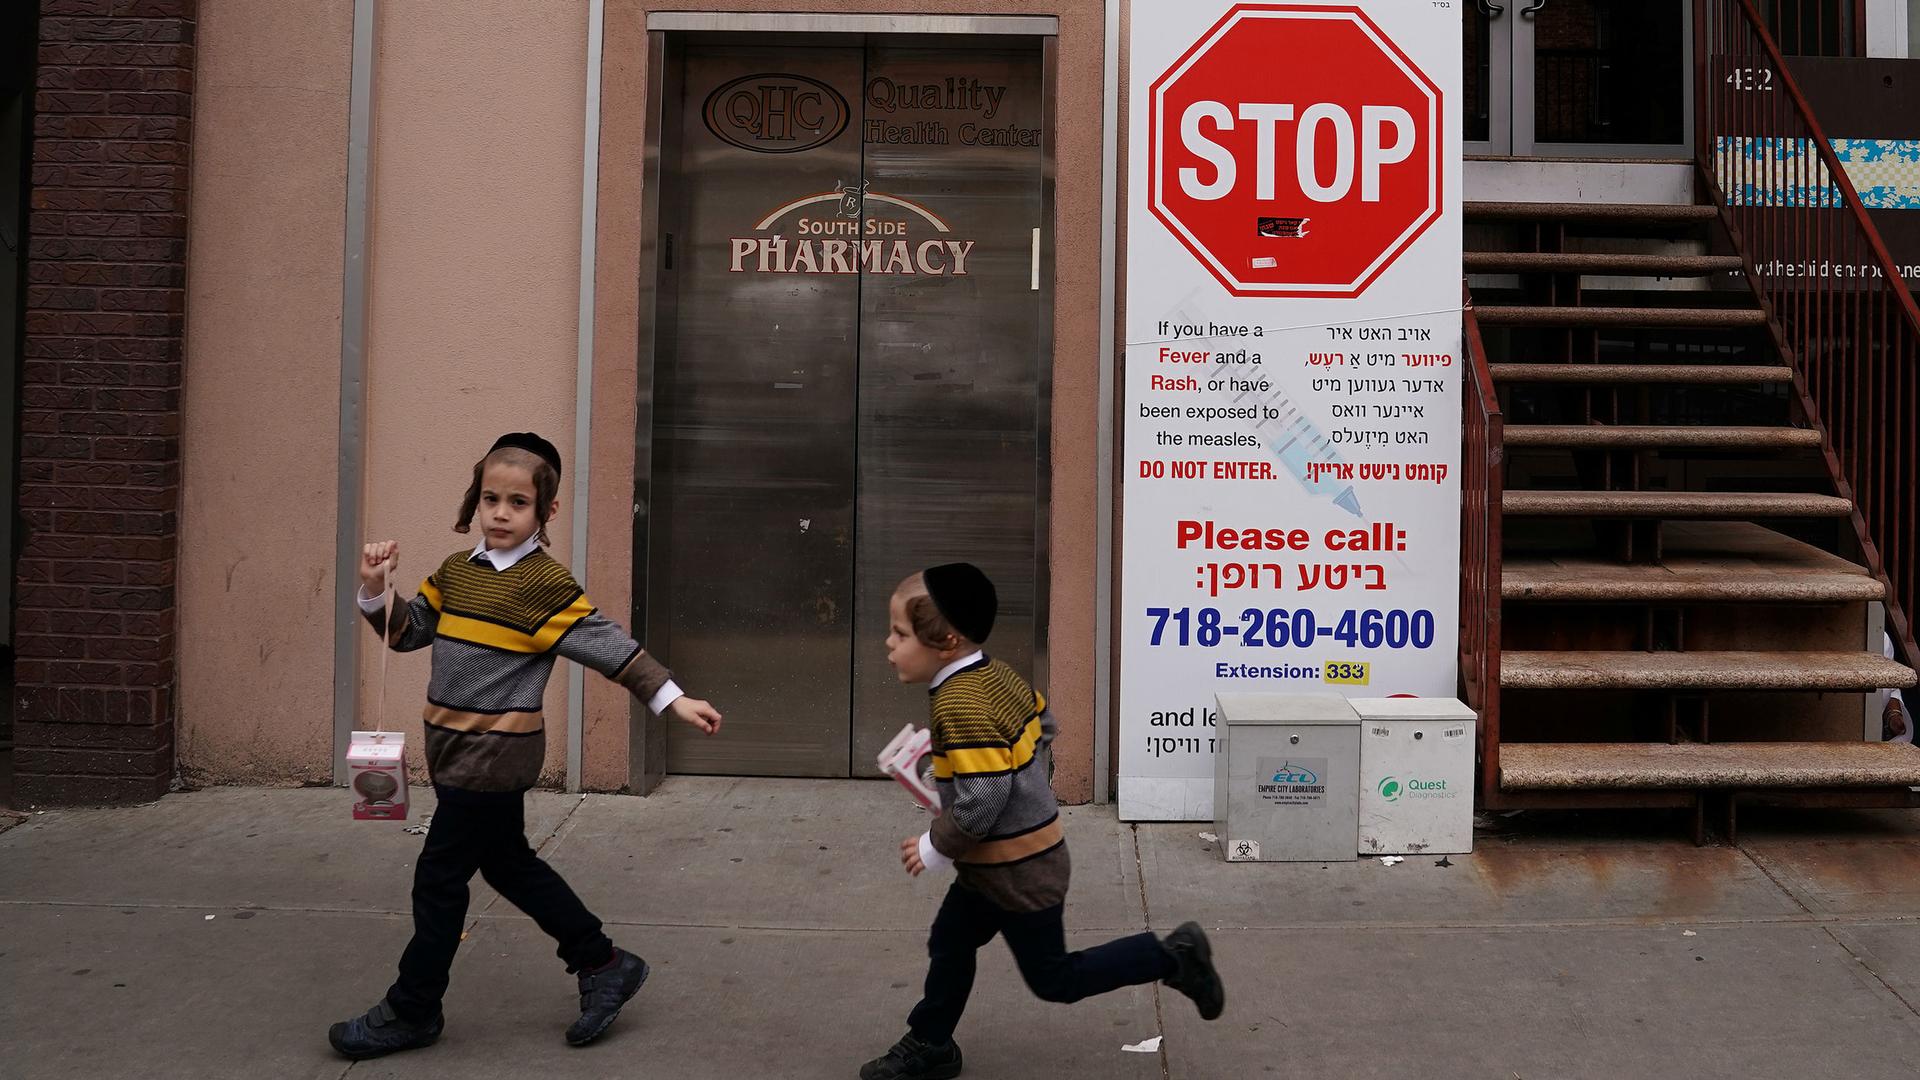 Two children are shown wearing matching stripped sweaters and running past a poster featuring a large stop sign.